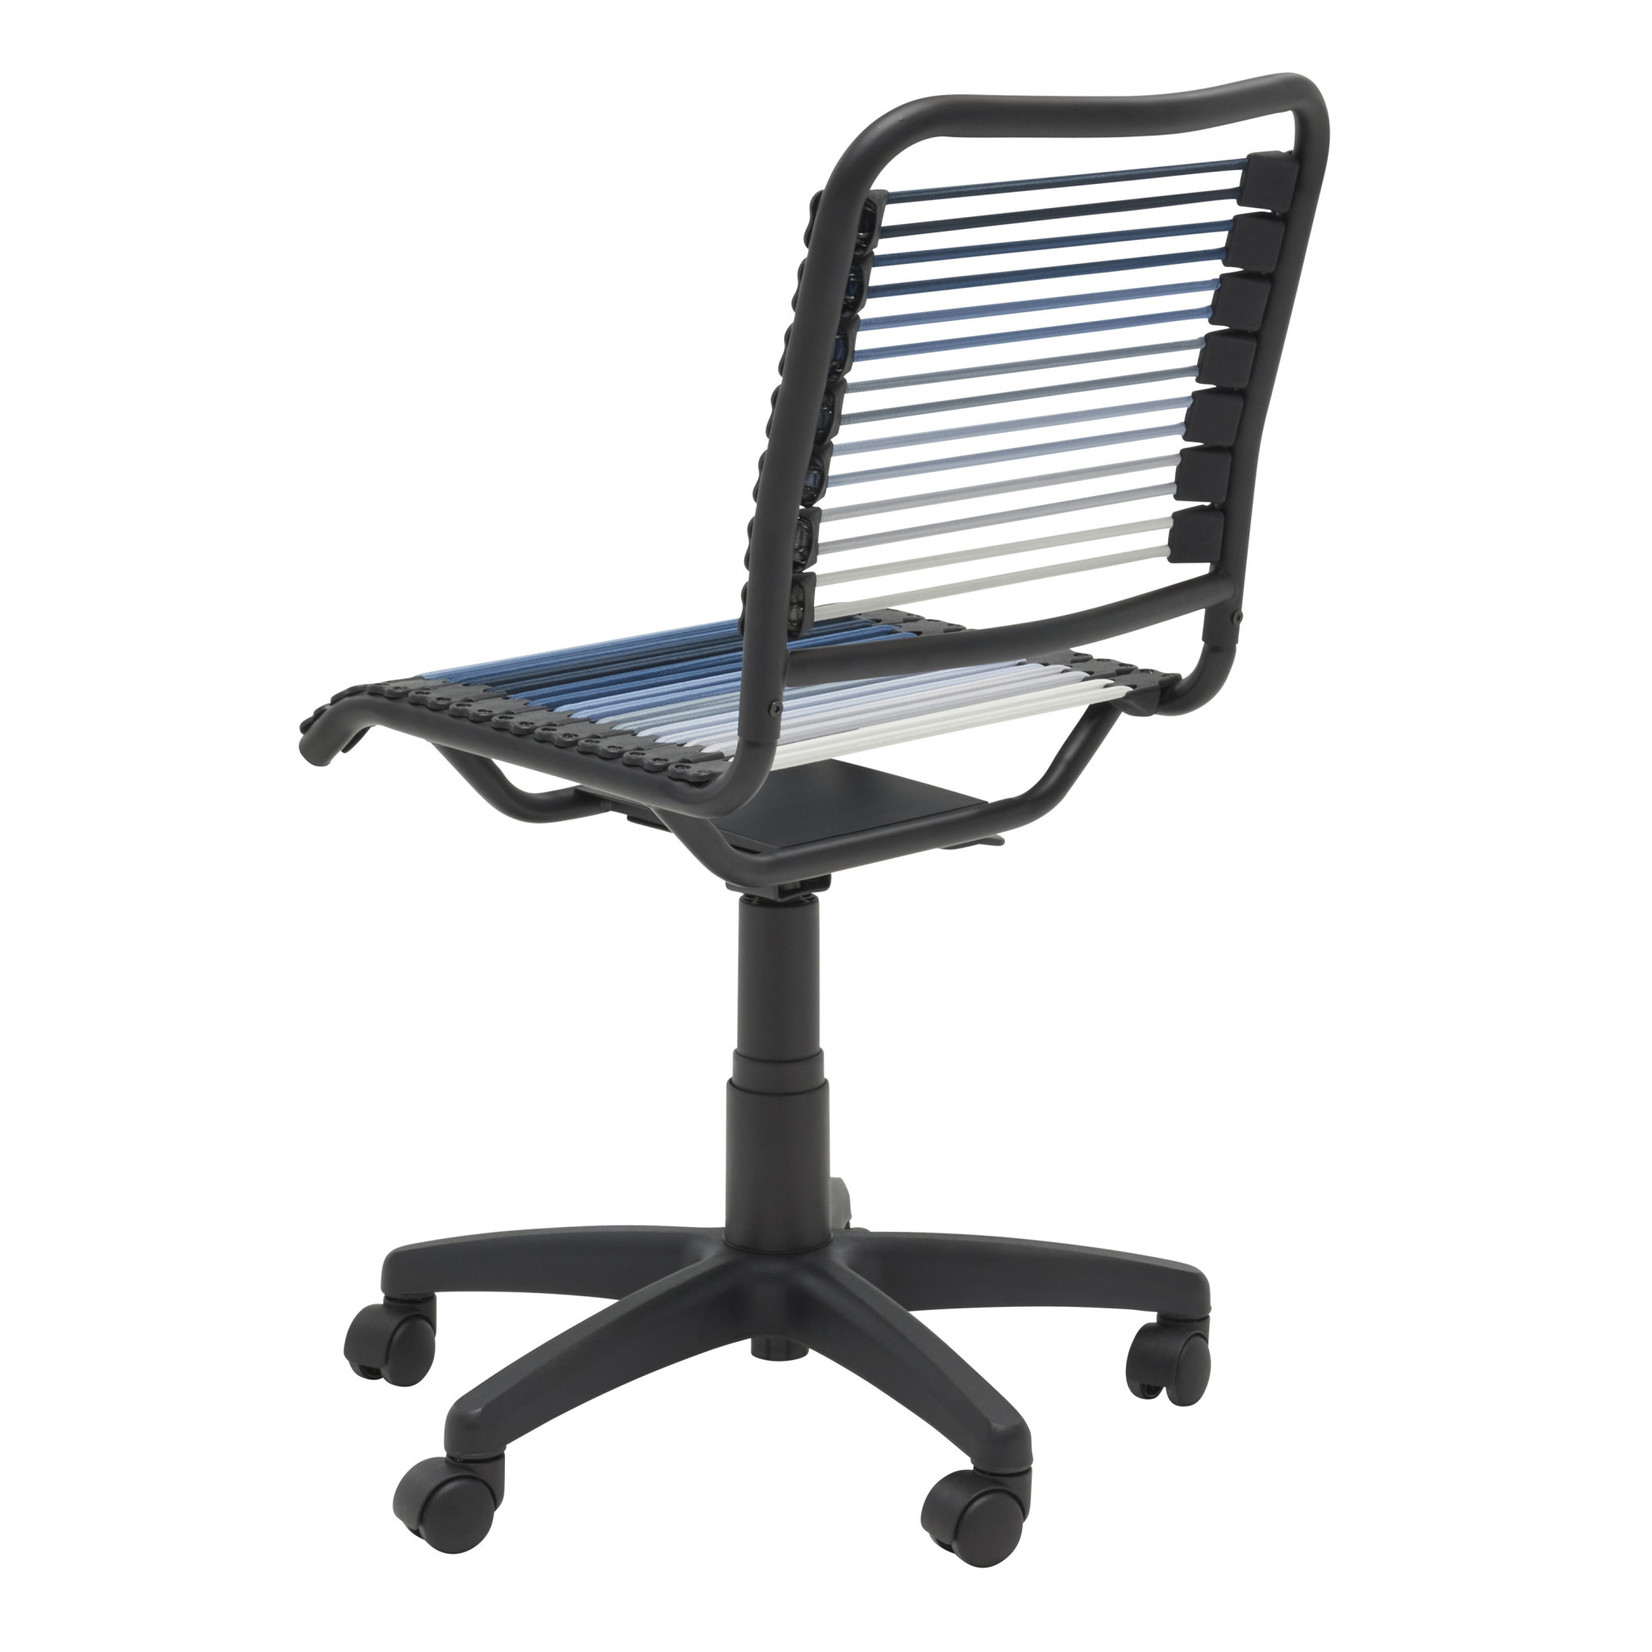 EuroStyle Bungie Low Back Office Chair Blue Ombre